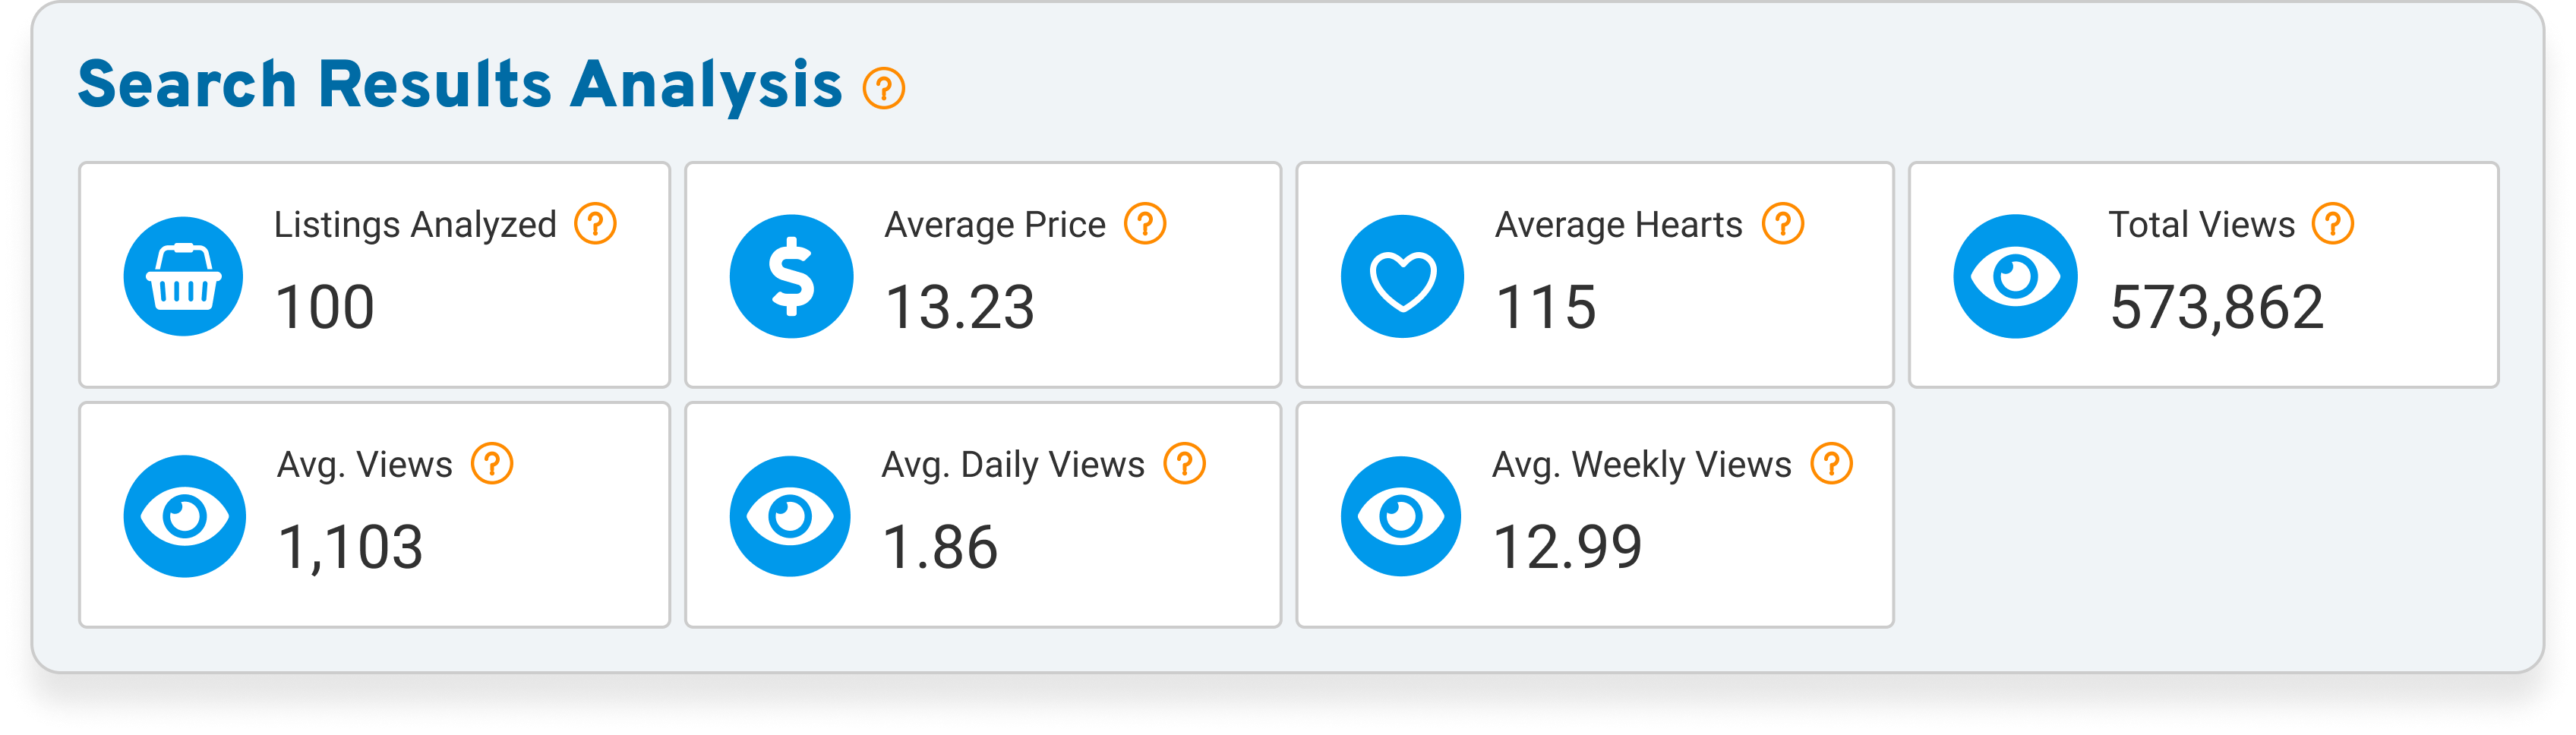 In this section, you can view the following information:
Number of listings analyzed
Average item price
Average hearts (number of favorites) each item has
Total views all of the listings have had, combined
Average number of views each listing has
Average number of daily views each listing has
Average number of weekly views each listing has
